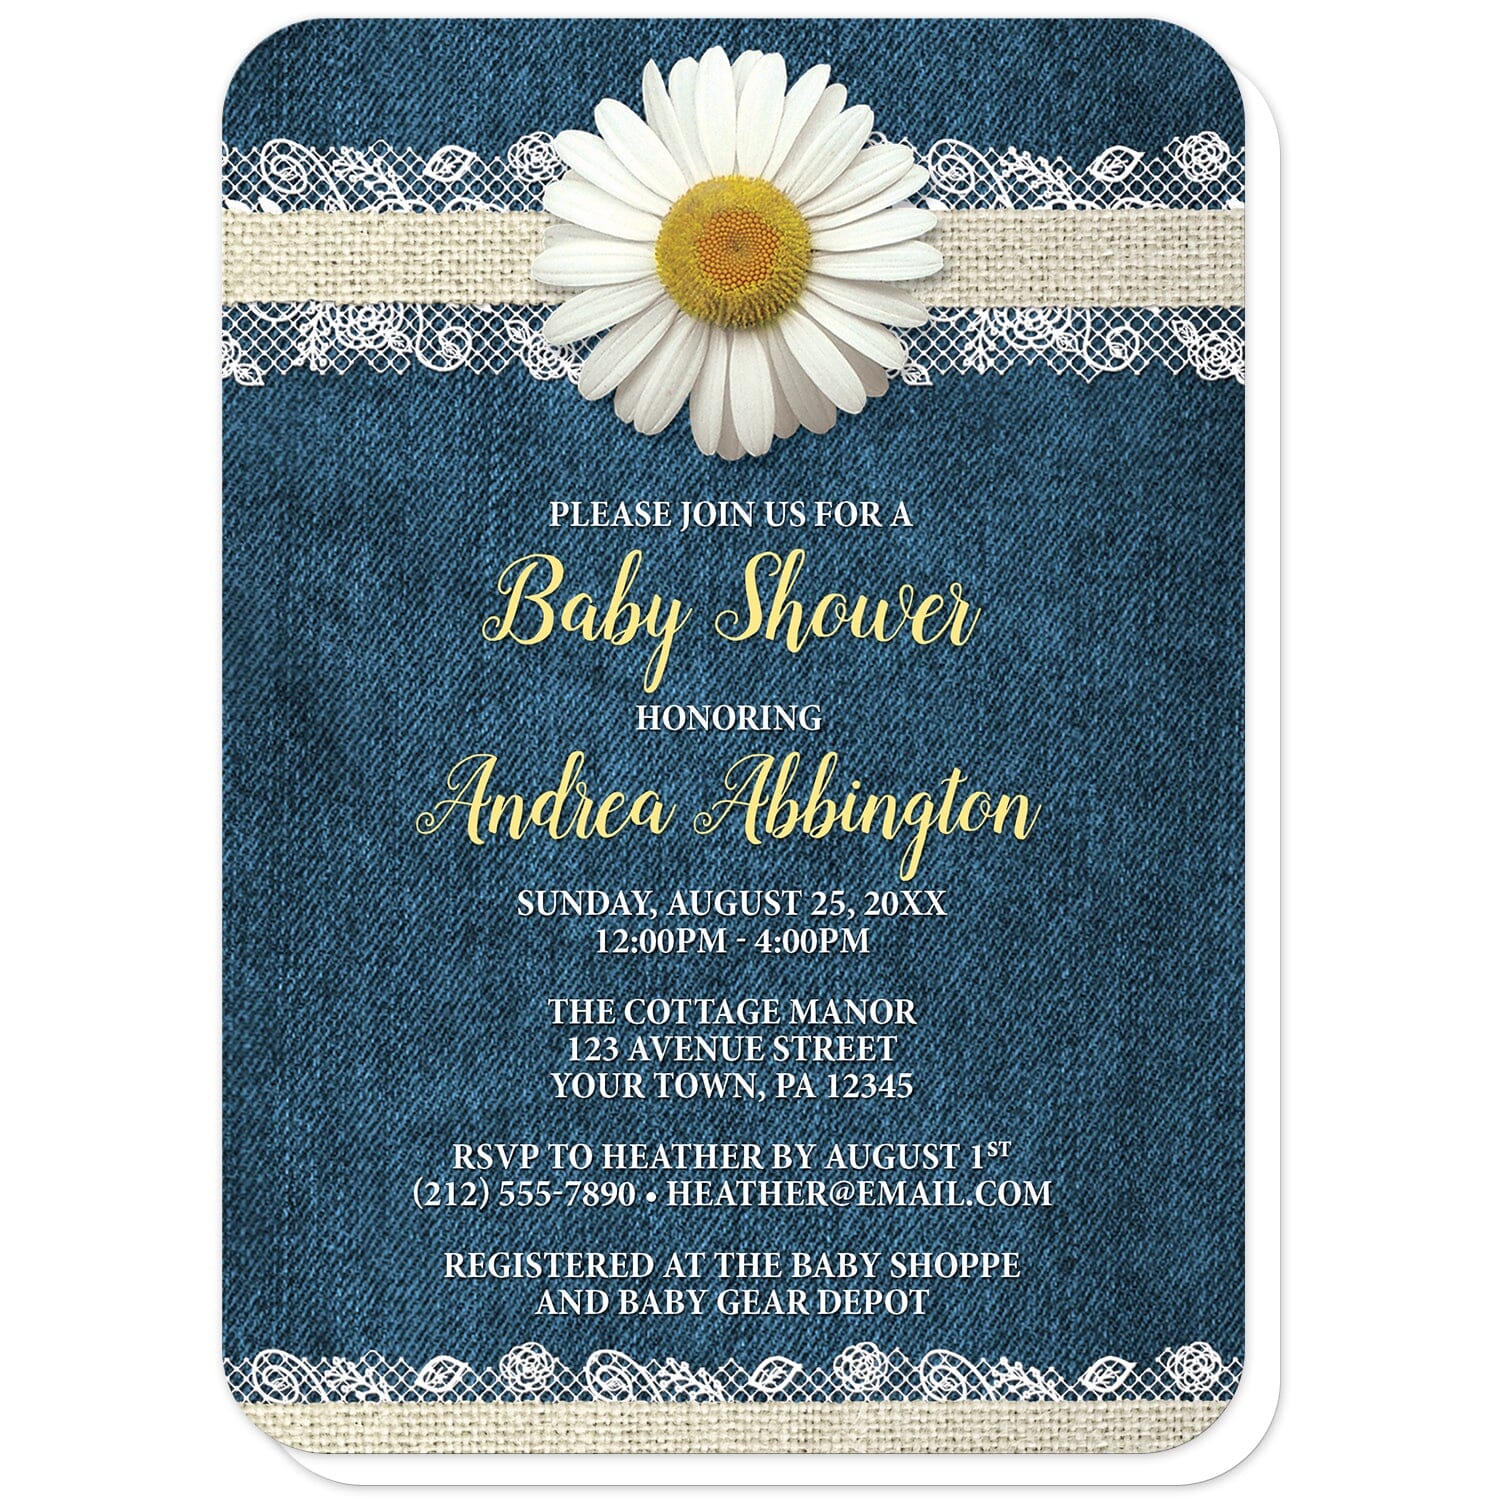 Daisy Burlap and Lace Denim Baby Shower Invitations (with rounded corners) at Artistically Invited. Southern rustic daisy burlap and lace denim baby shower invitations with a white daisy flower centered at the top on a burlap and lace ribbon strip illustration, over a country blue denim background. Your personalized baby shower celebration details are custom printed in yellow and white over the denim design.